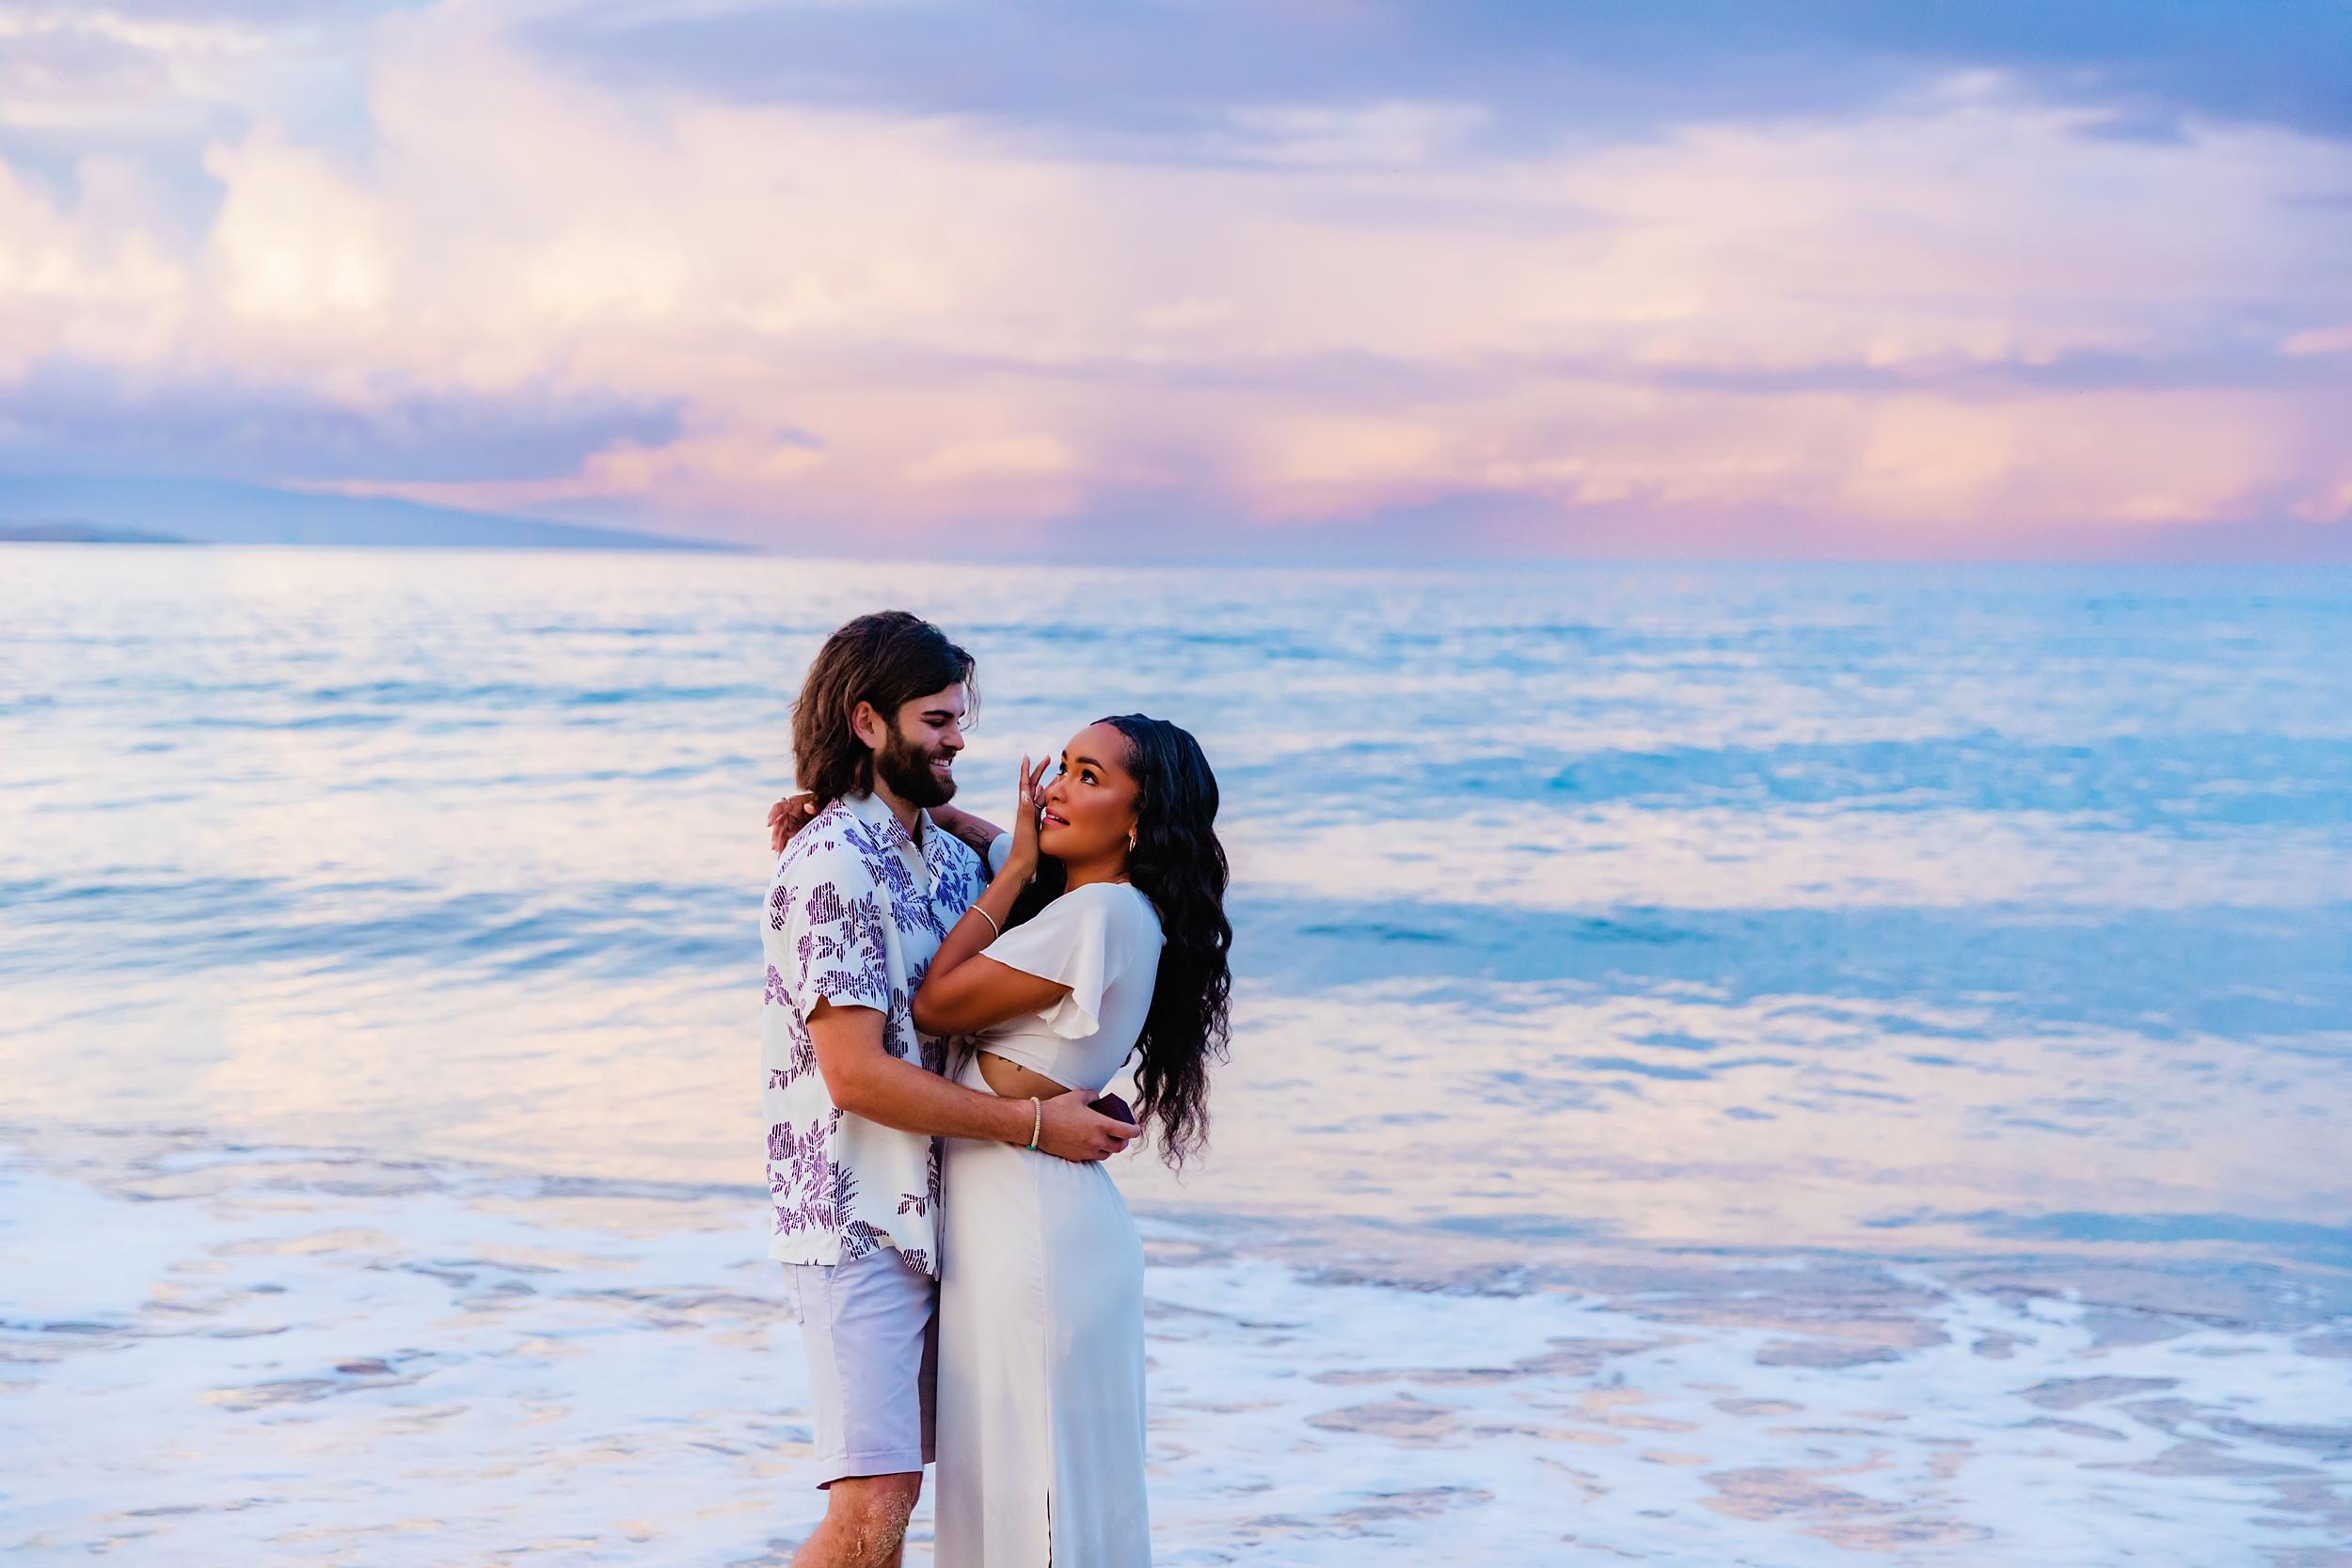 woman cries after her husband proposes to her on the beach in hawaii at sunrise